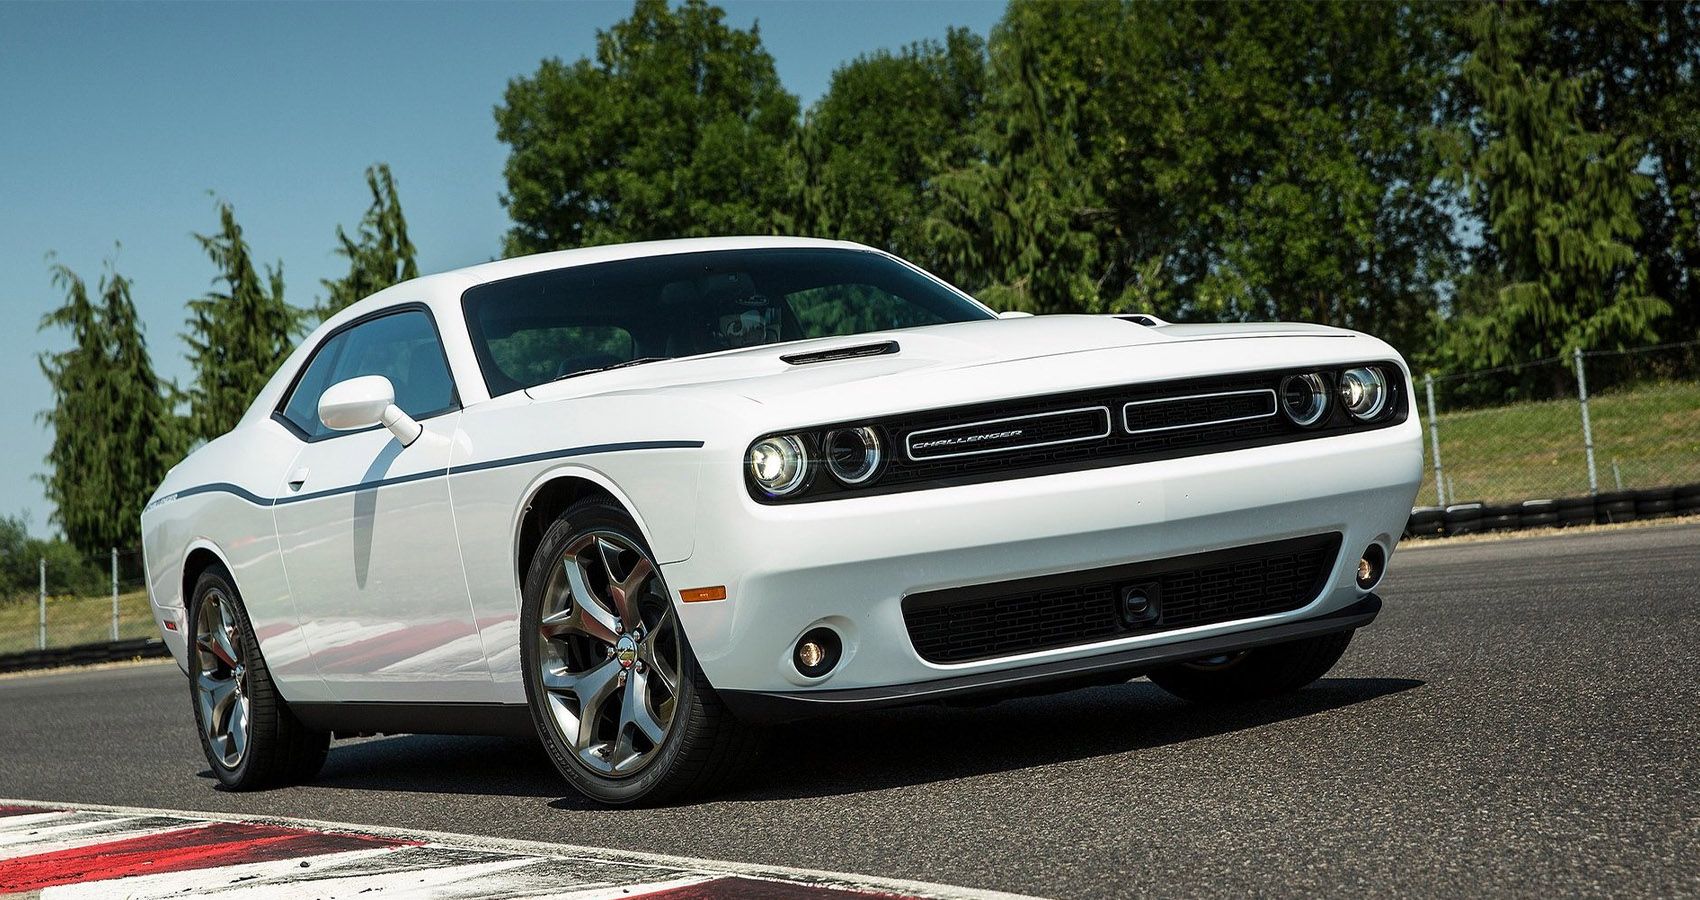 2015 Dodge Challenger front view in white